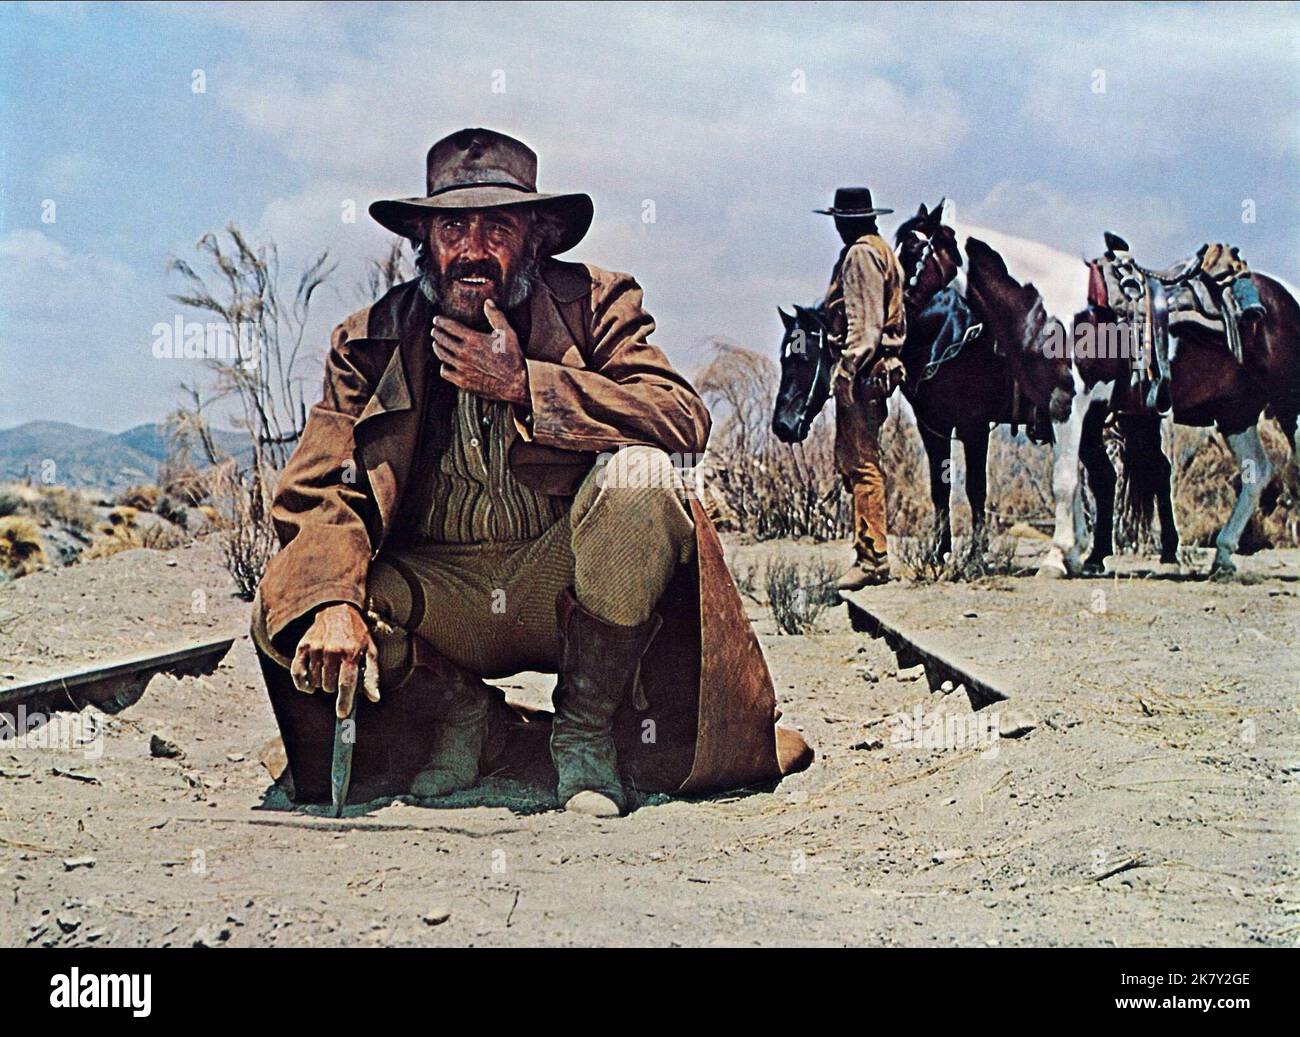 Jason Robards Film: Once Upon A Time In The West; C'Era Una Volta Il West (C 'era una volta il West) Characters: Cheyenne It/Usa 1968, Director: Sergio  Leone 21 December 1968 **WARNING** This